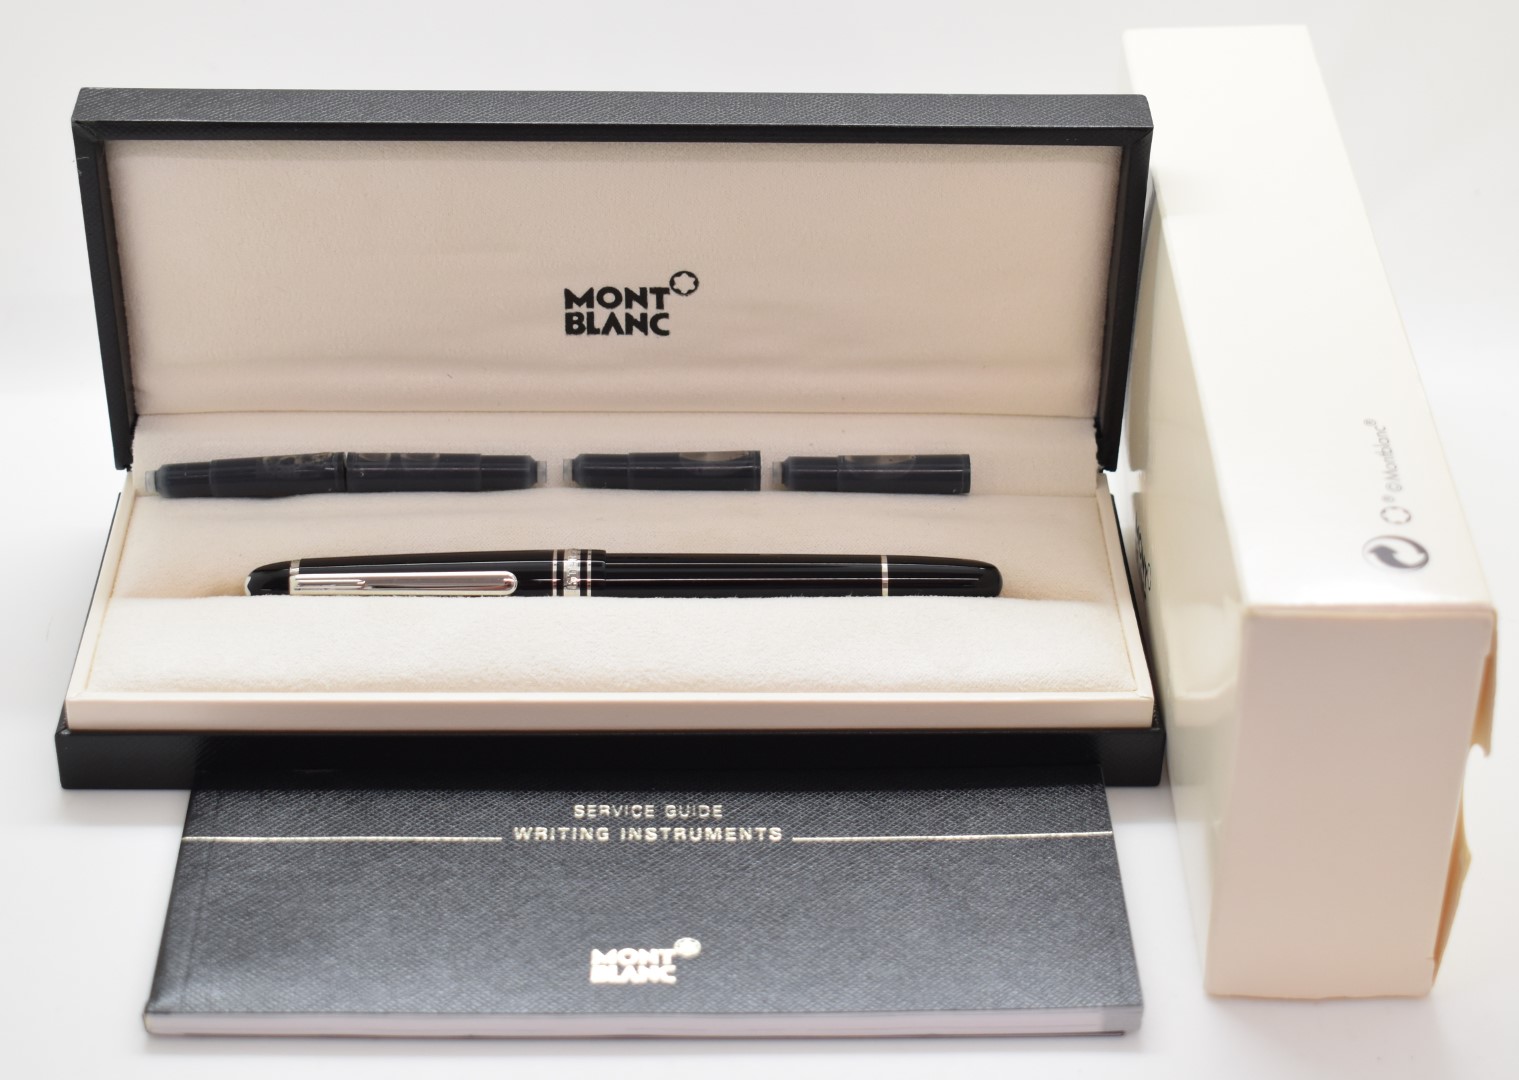 Montblanc Meisterstuck fountain pen with 14k gold nib marked 4810, in original box with service